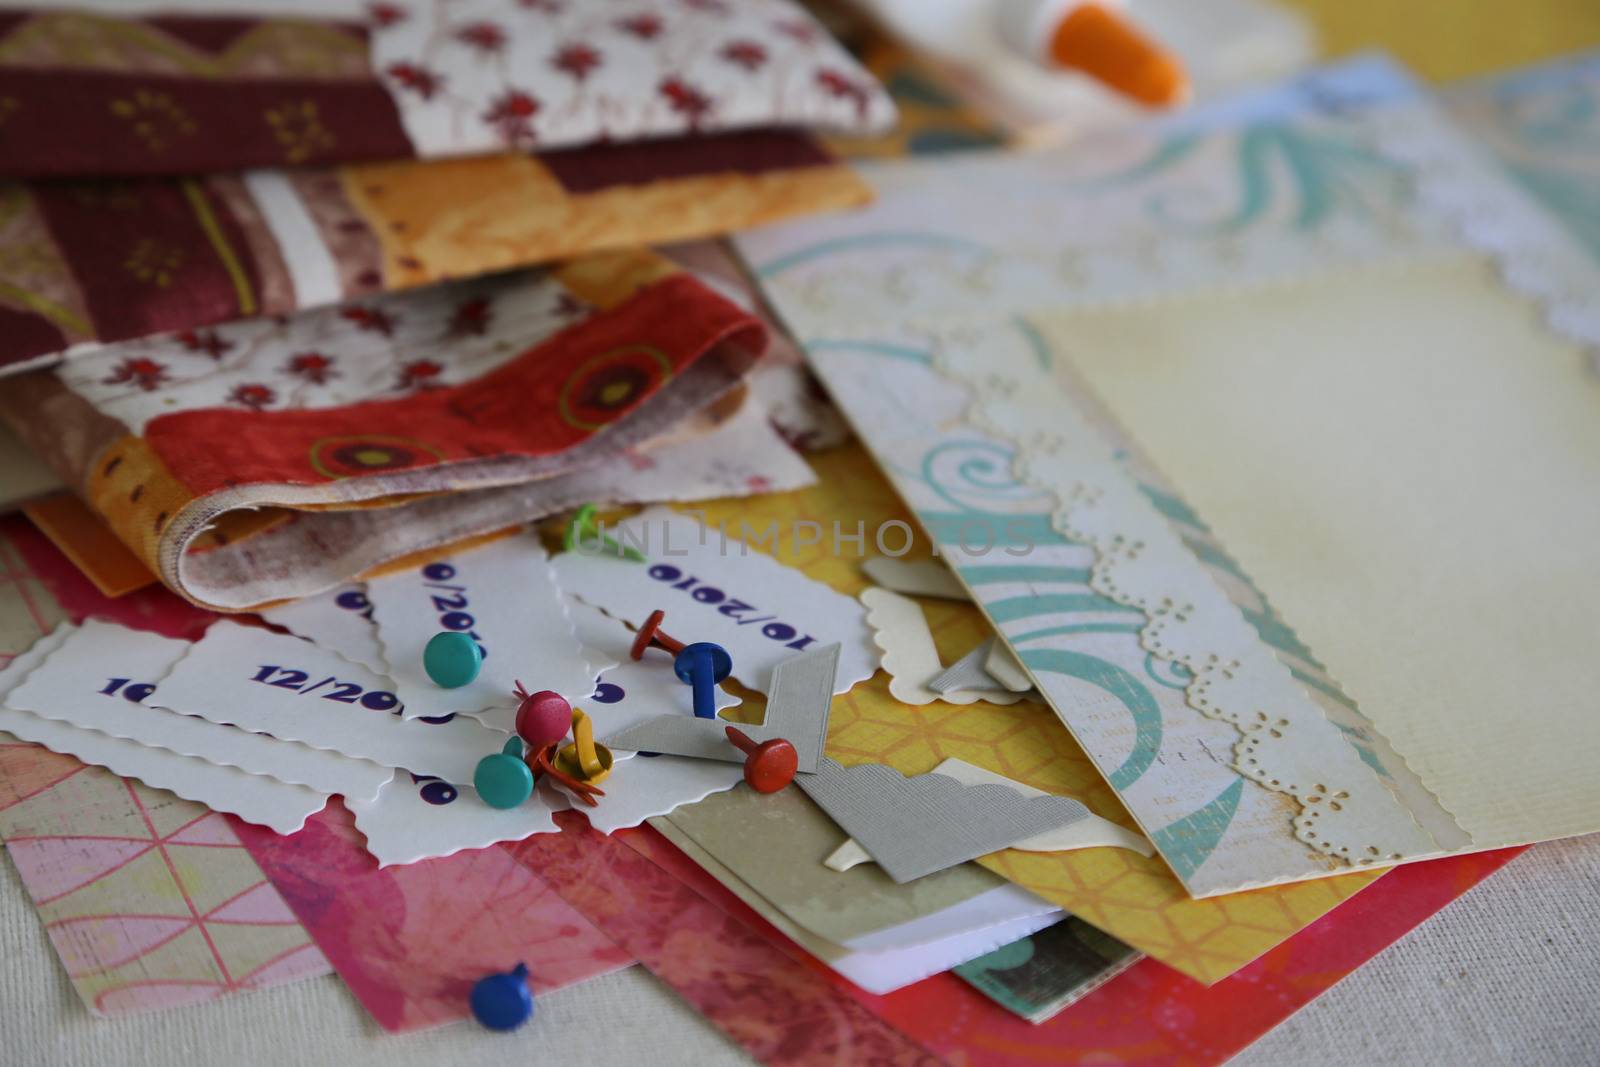 Scrapbooking supplies and accessories for preparing a handmade photoalbum